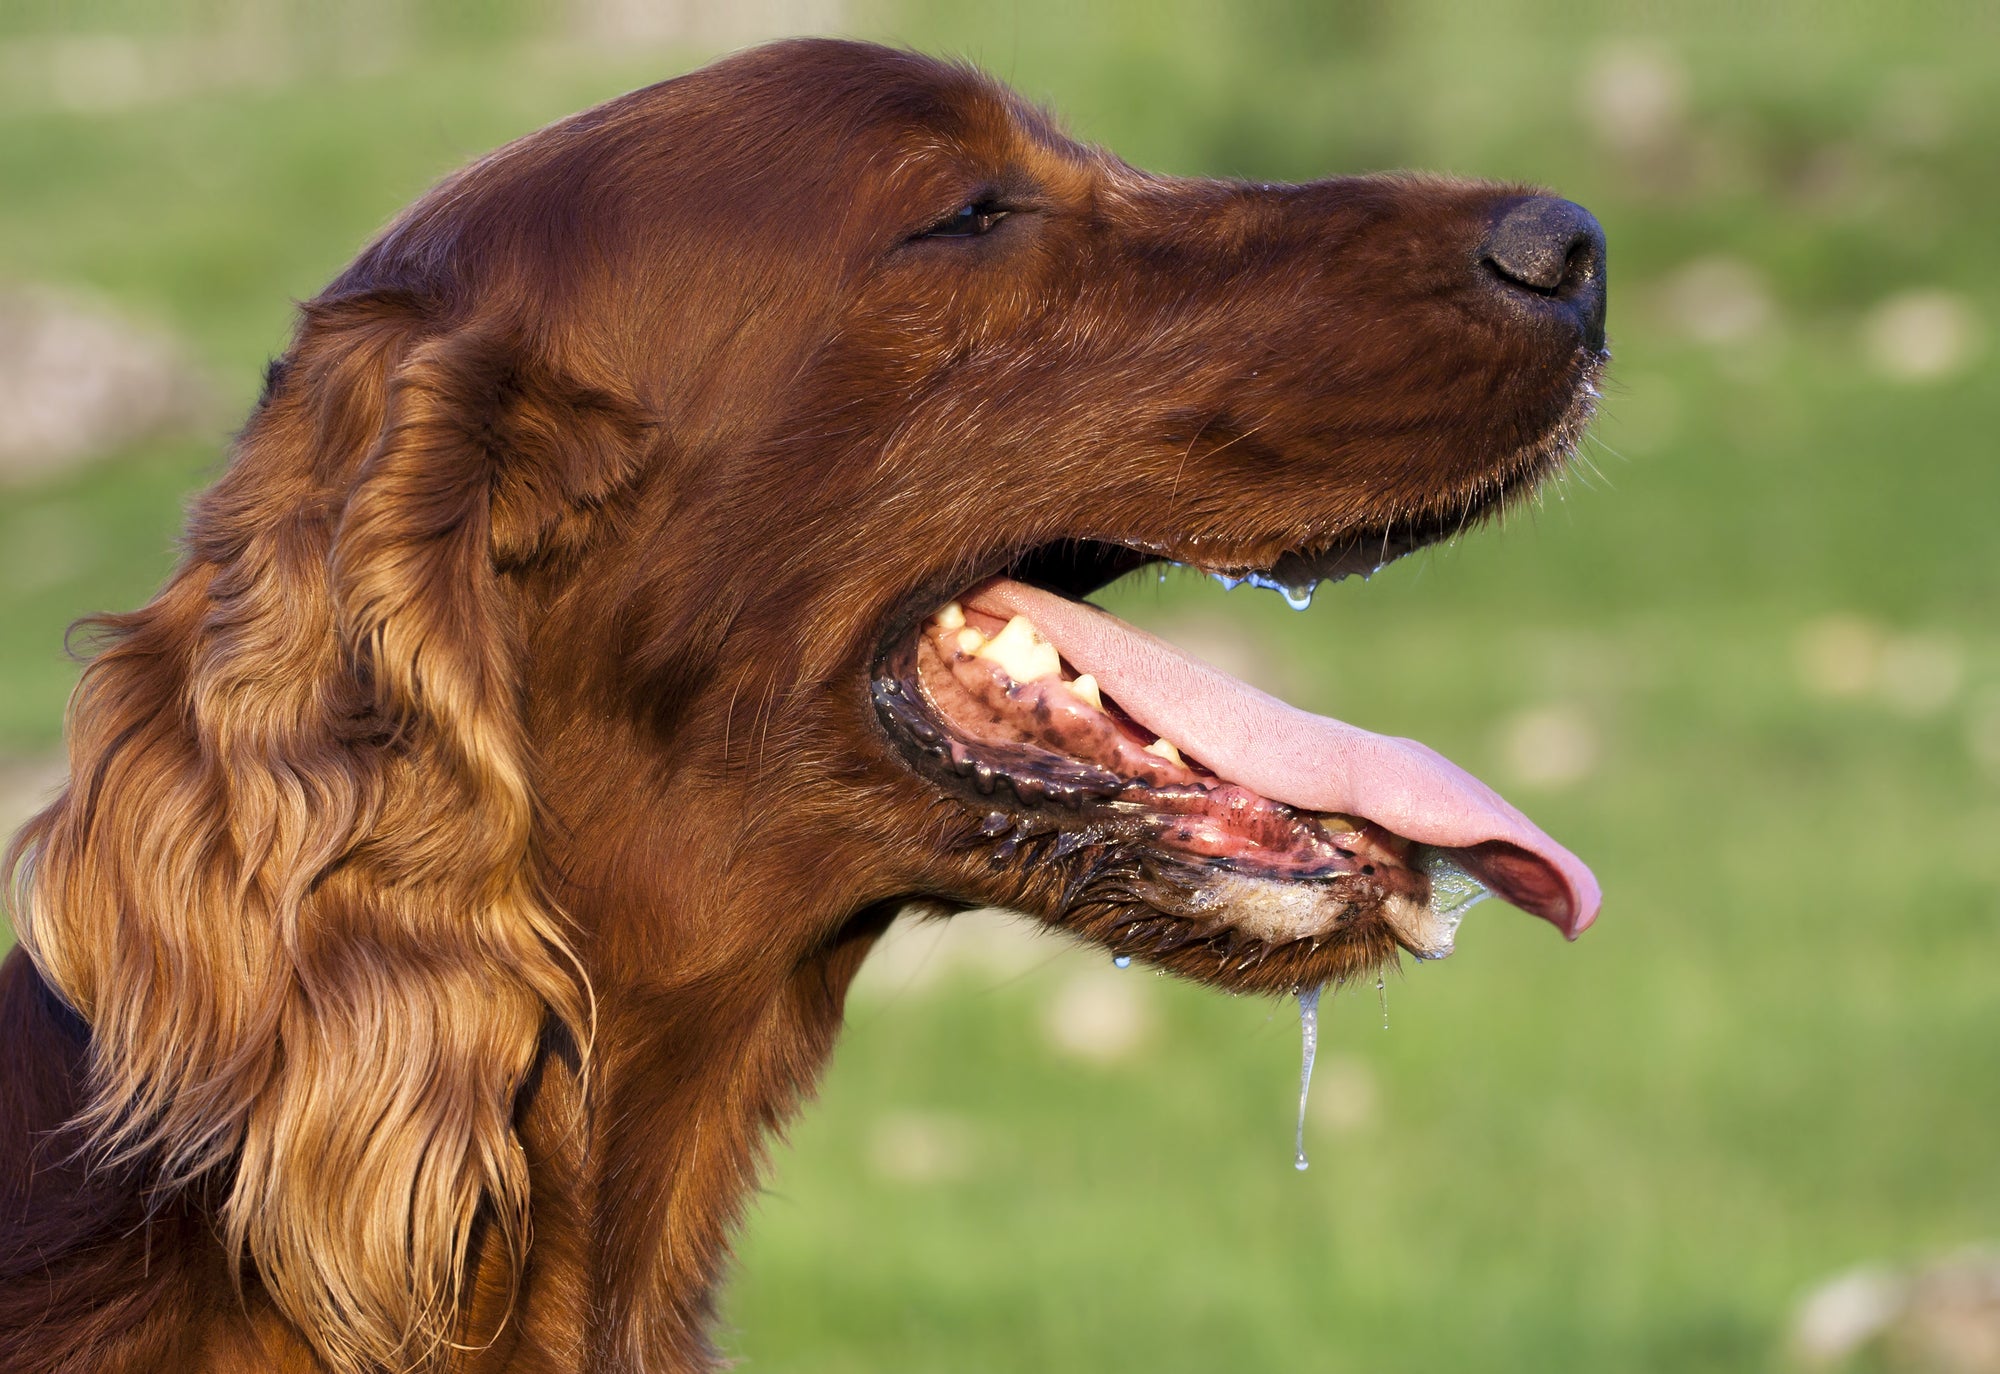 A dog with mouth open and tongue sticking out, water dripping off its face, and close-up of eye and nose.